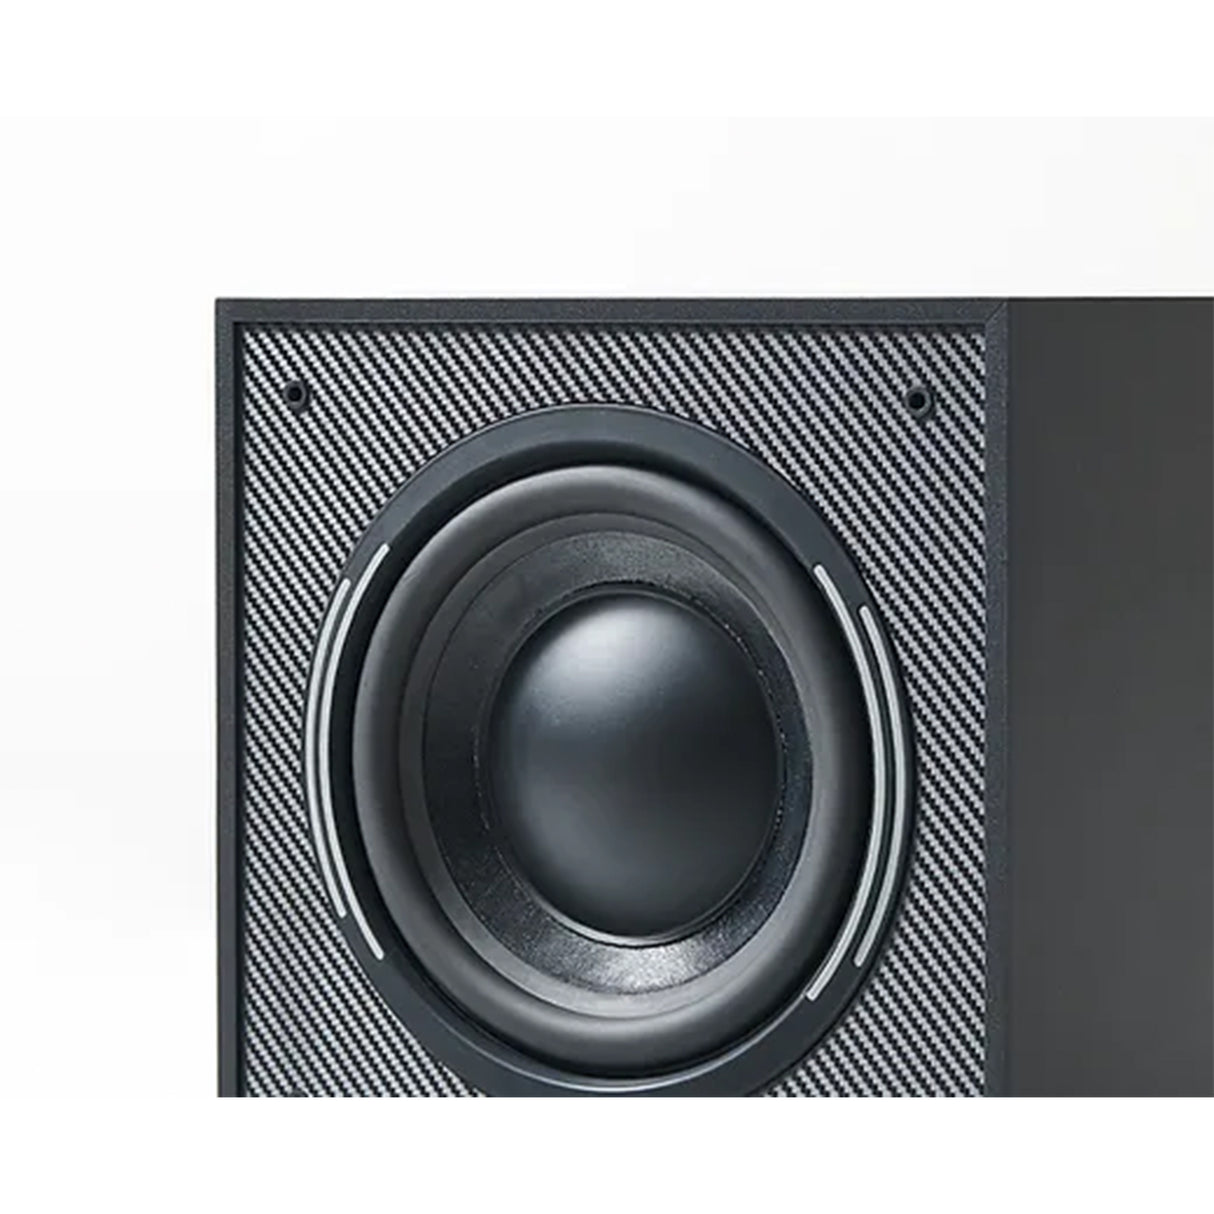 Elipson Horus 8S - 8 Inches 150W Powered Subwoofer (Black)